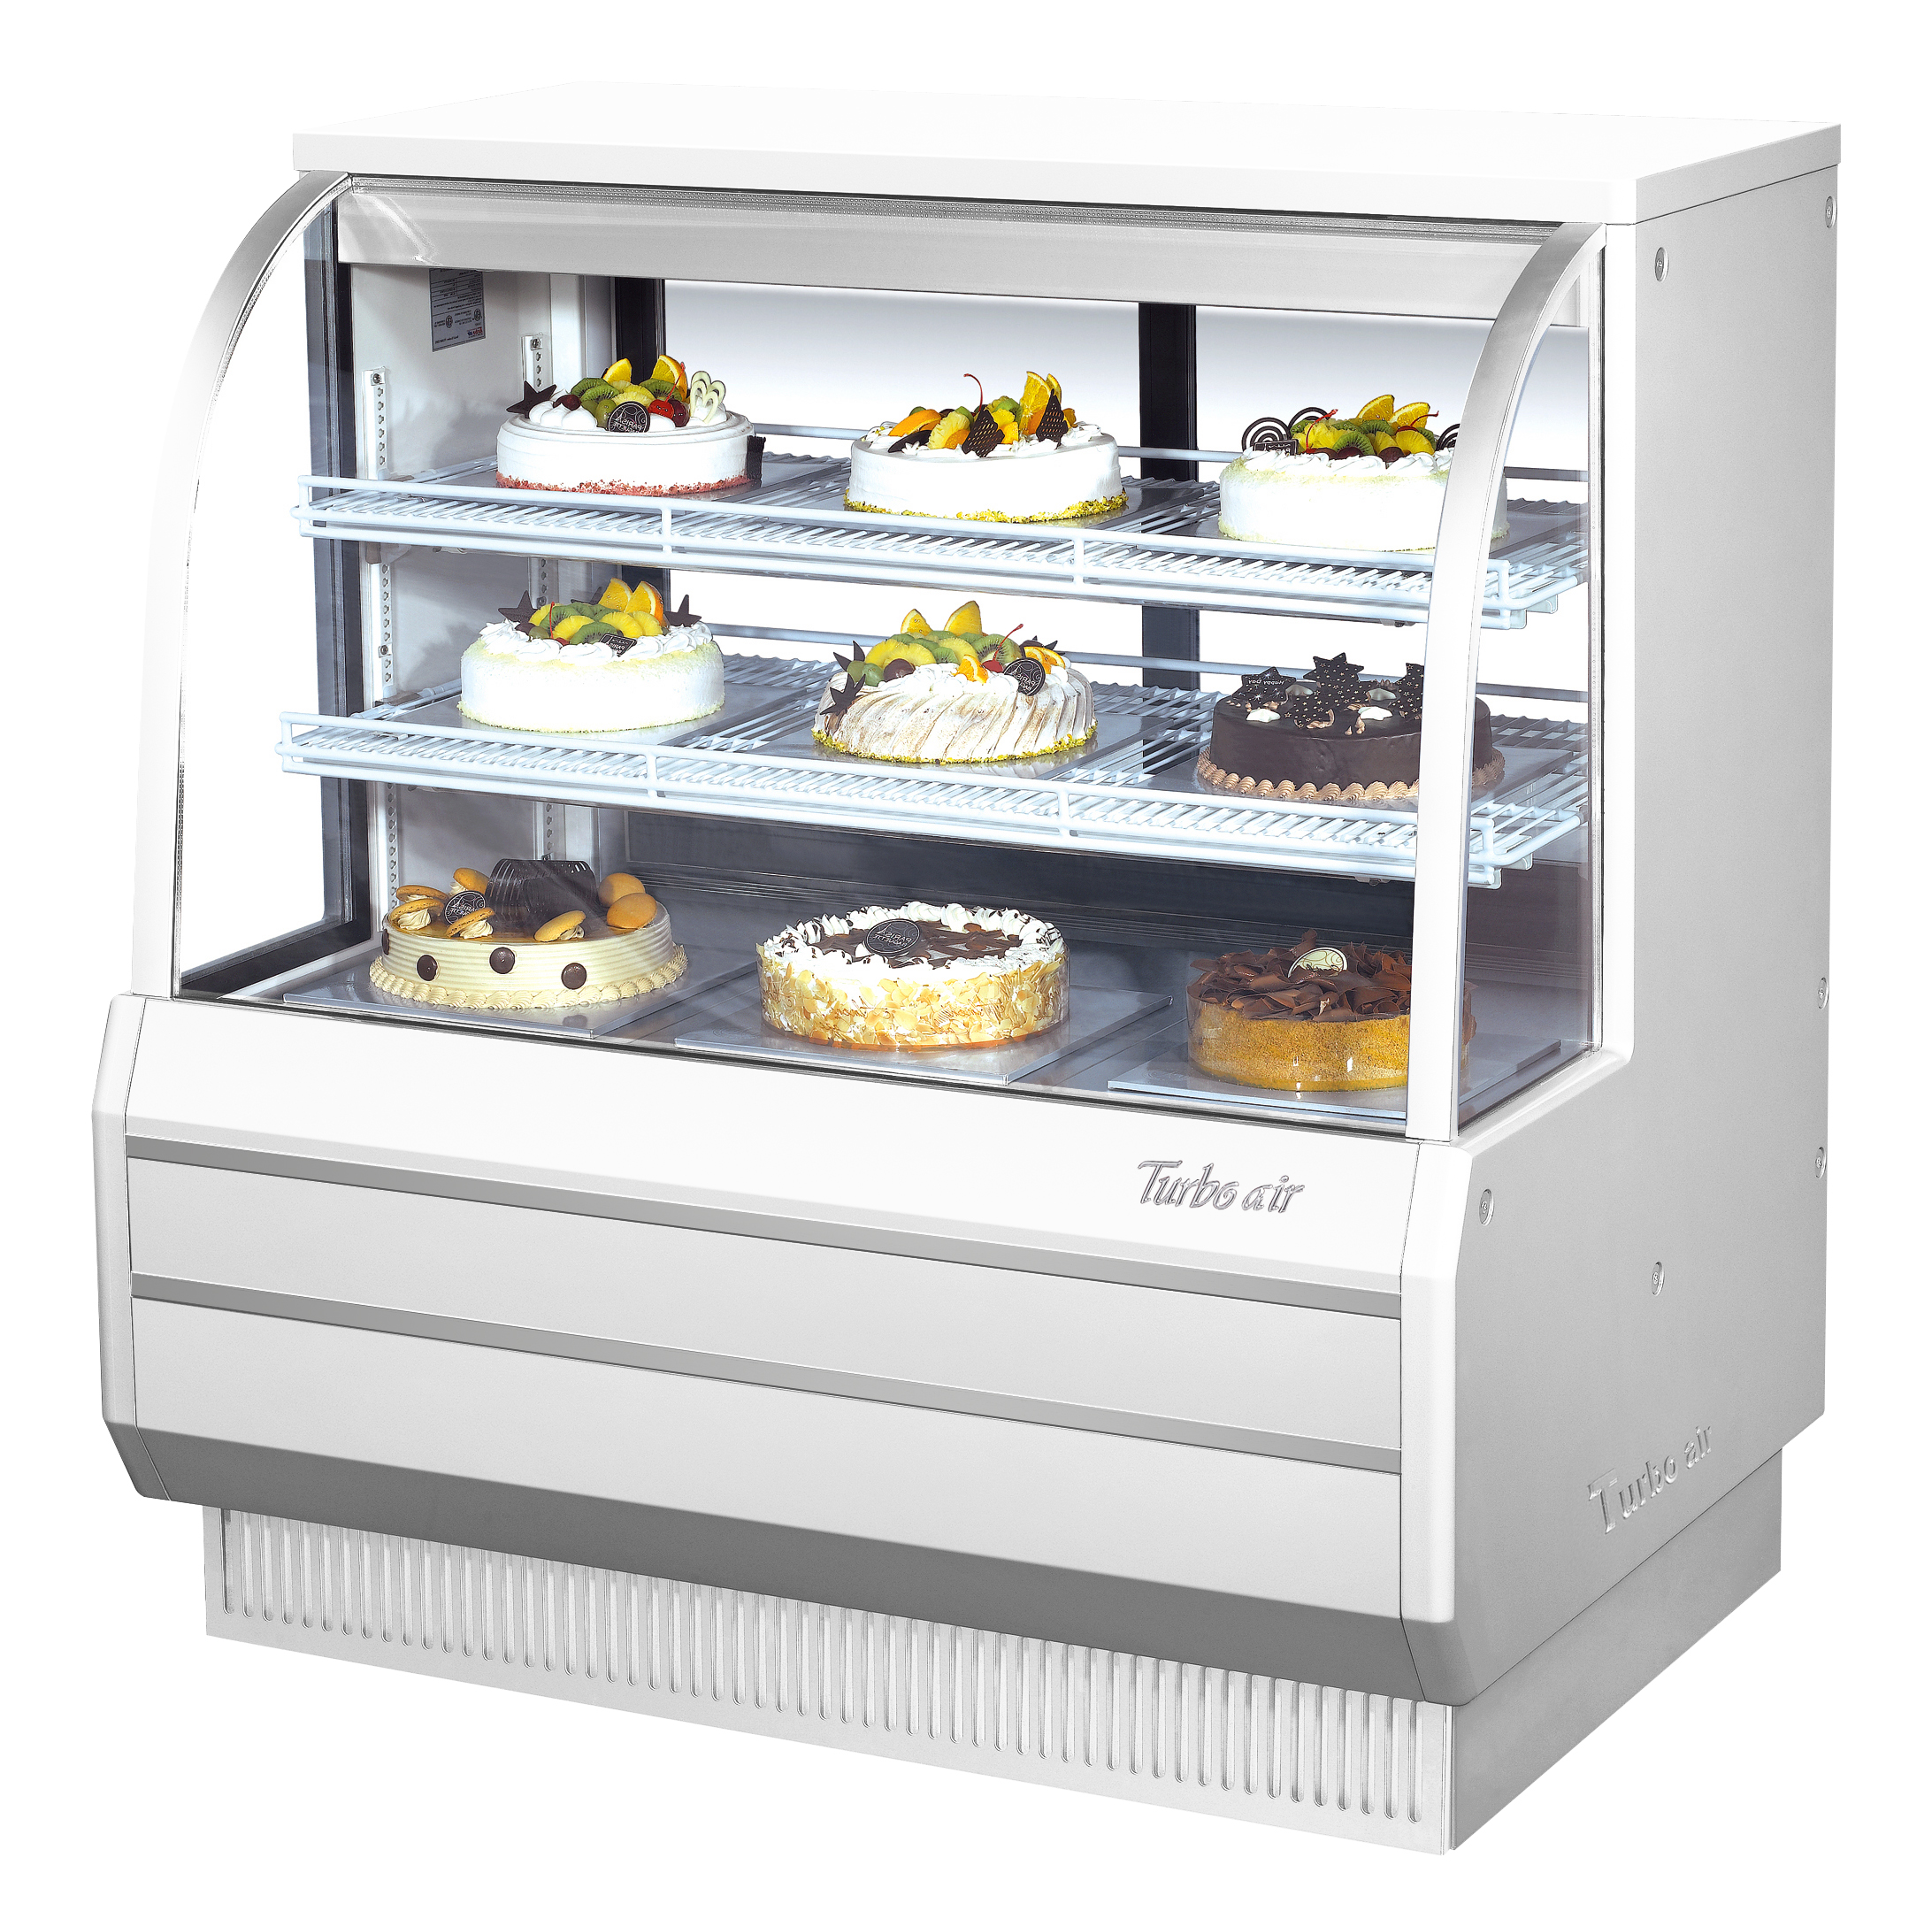 Bakery Case, refrigerated, 14.8 cu.ft